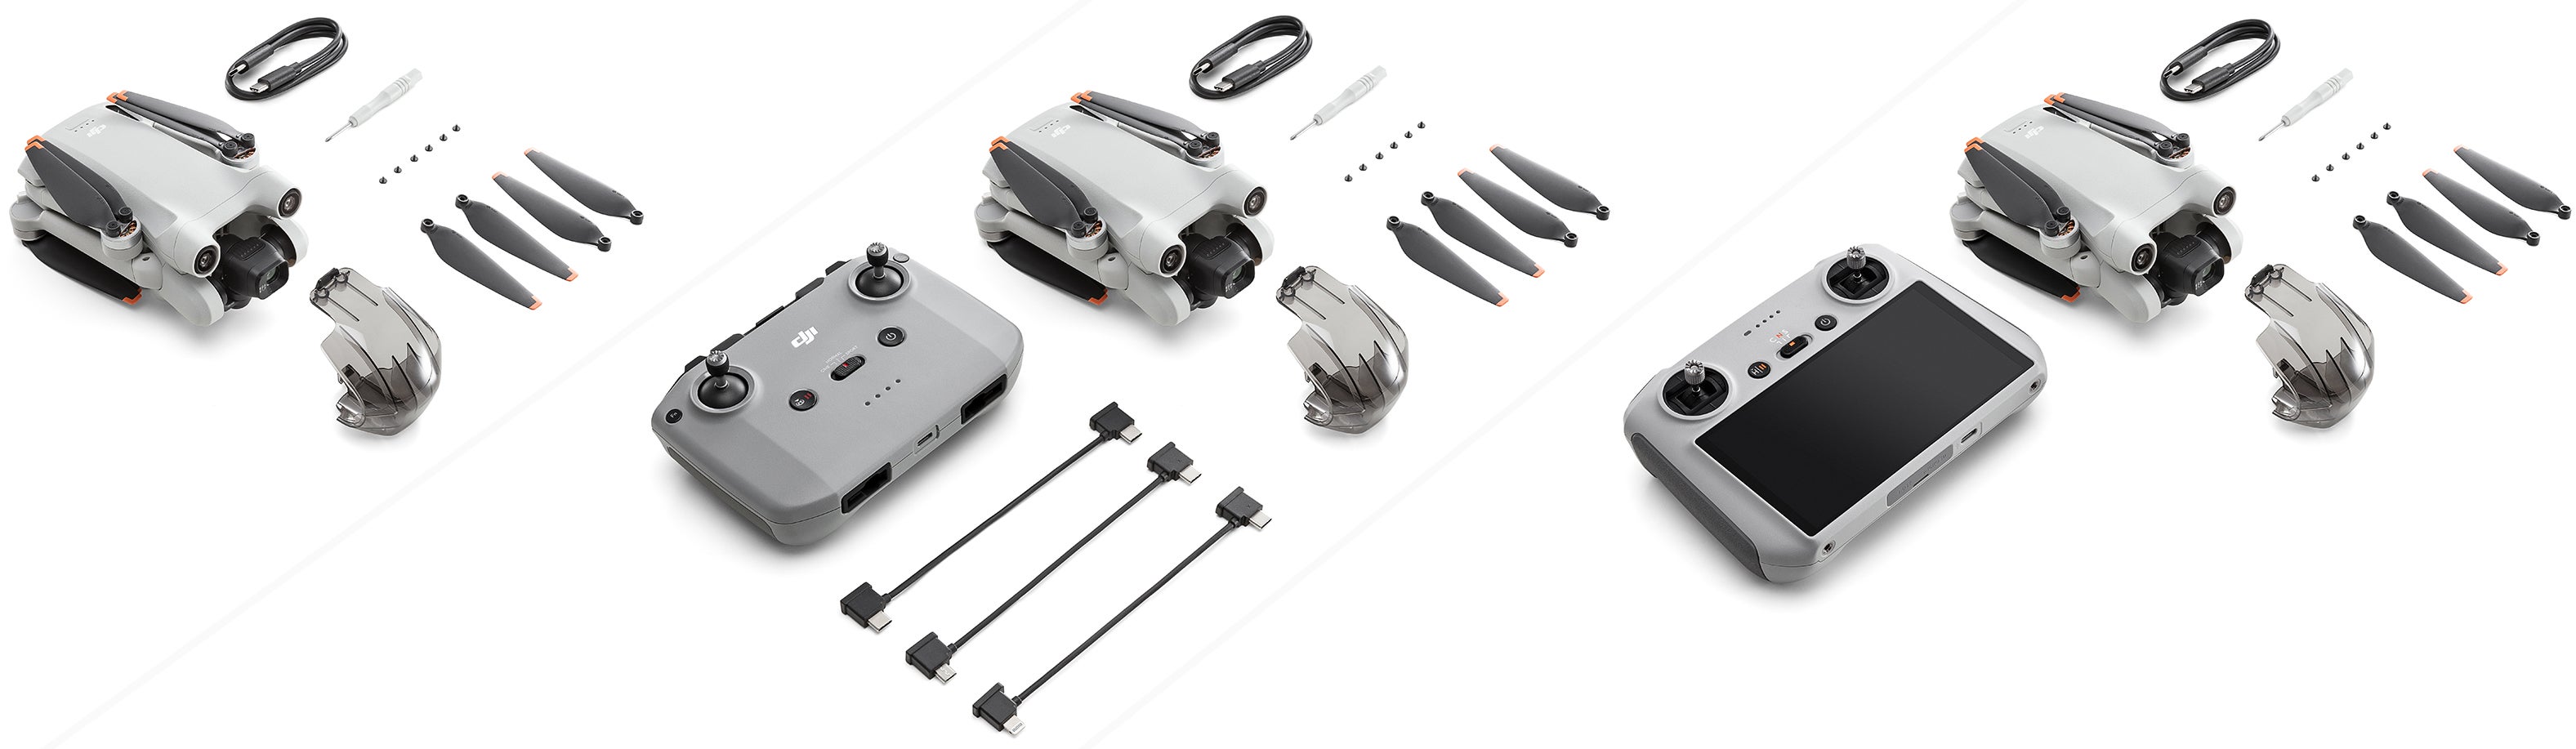 The DJI Mini 3 Pro on its own starts at $US669 ($929), but is also available in two bundles including either the older DJI RC-N1 controller for $US759 ($1,054), or the newer DJI RC controller for $US909 ($1,262). (Image: DJI)